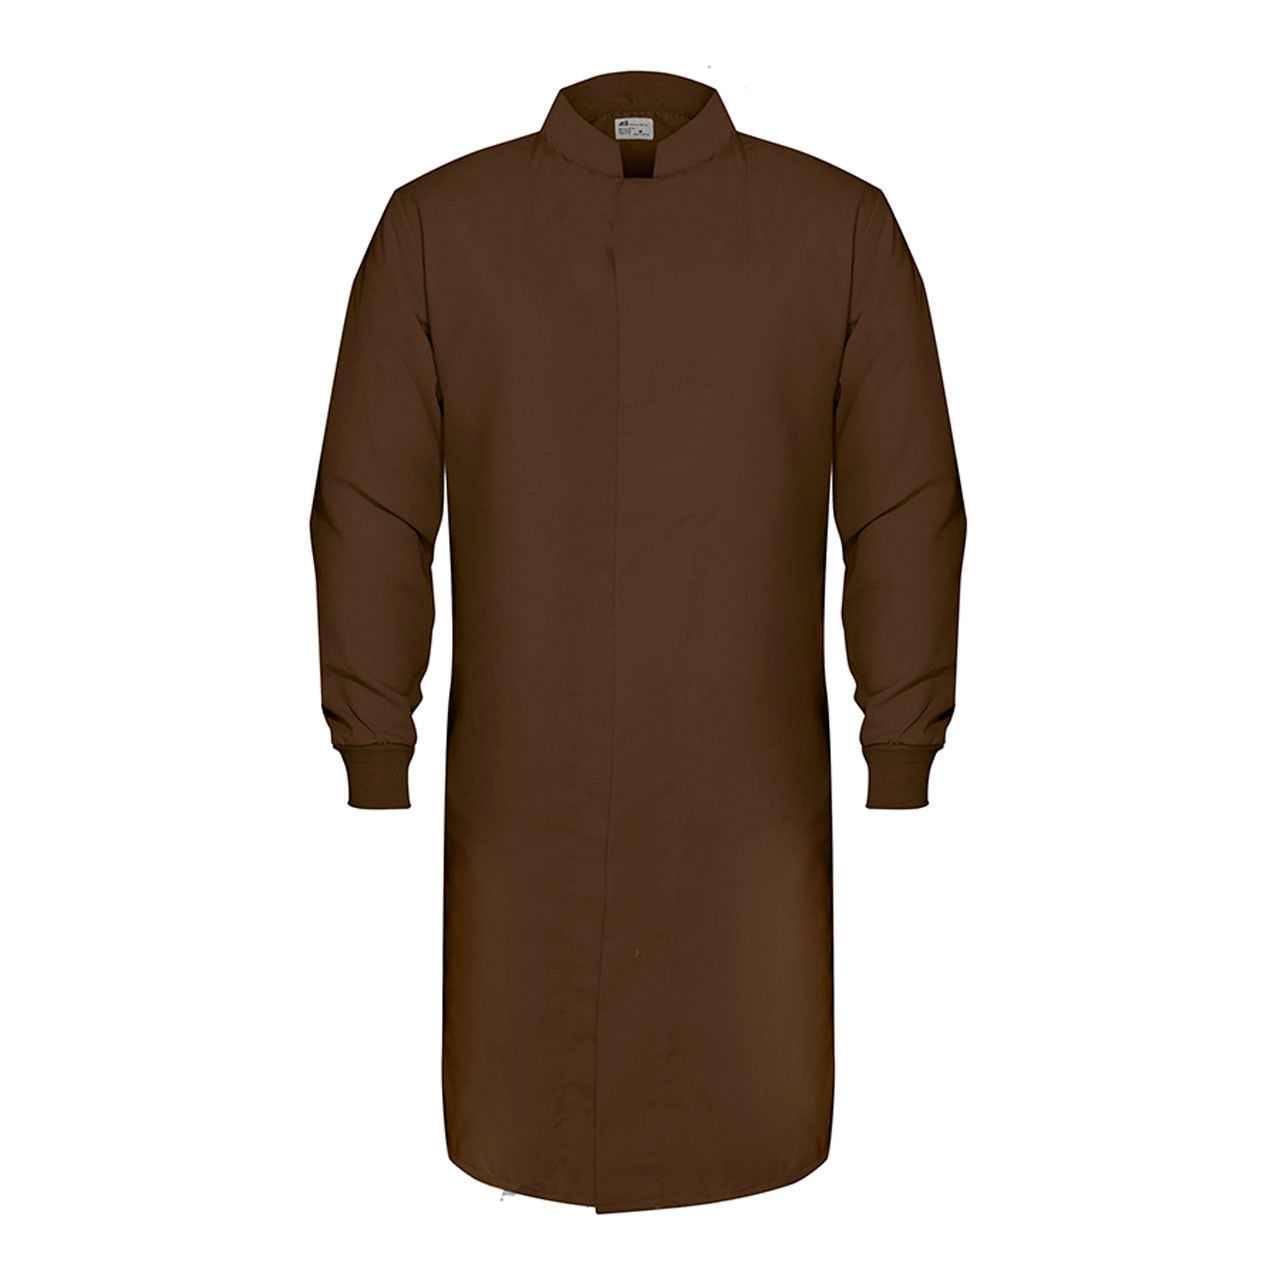 Is the fabric of this brown lab coat heavy?